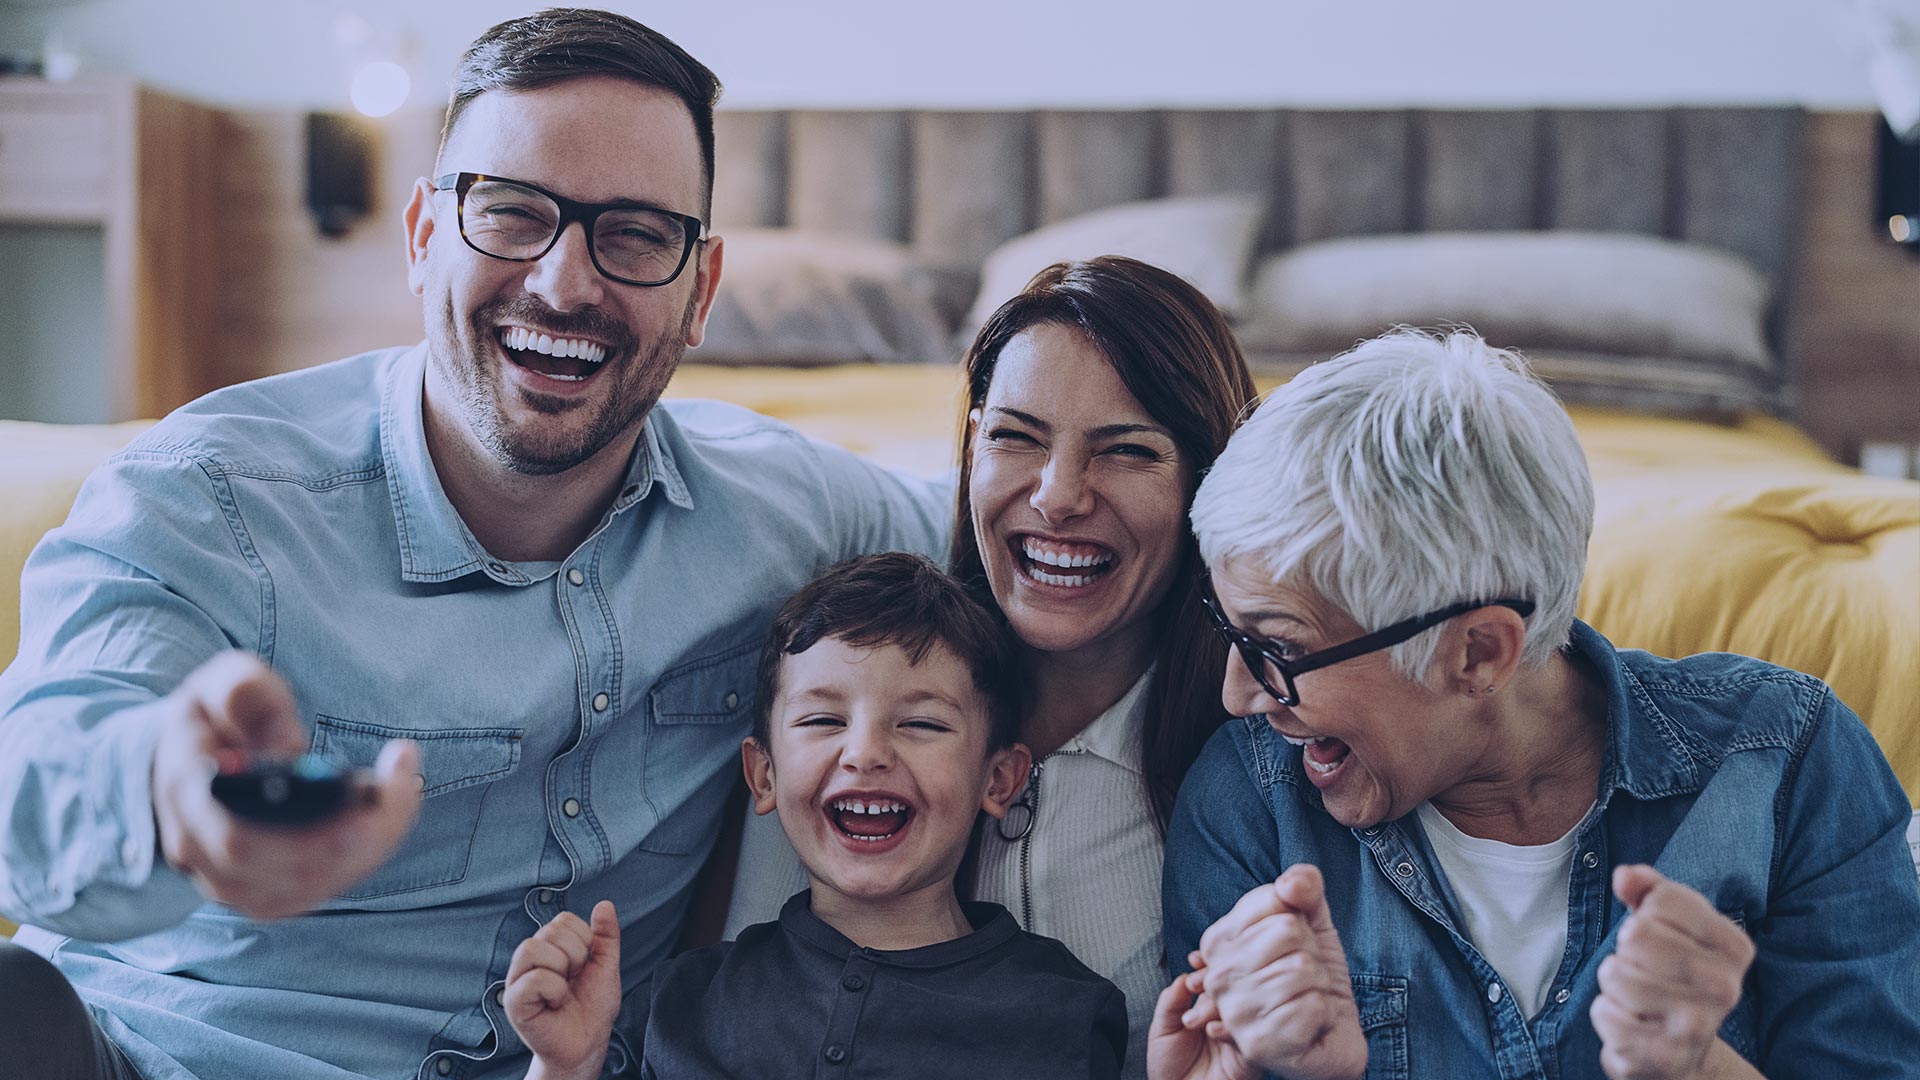 A smiling family in front of their living room television